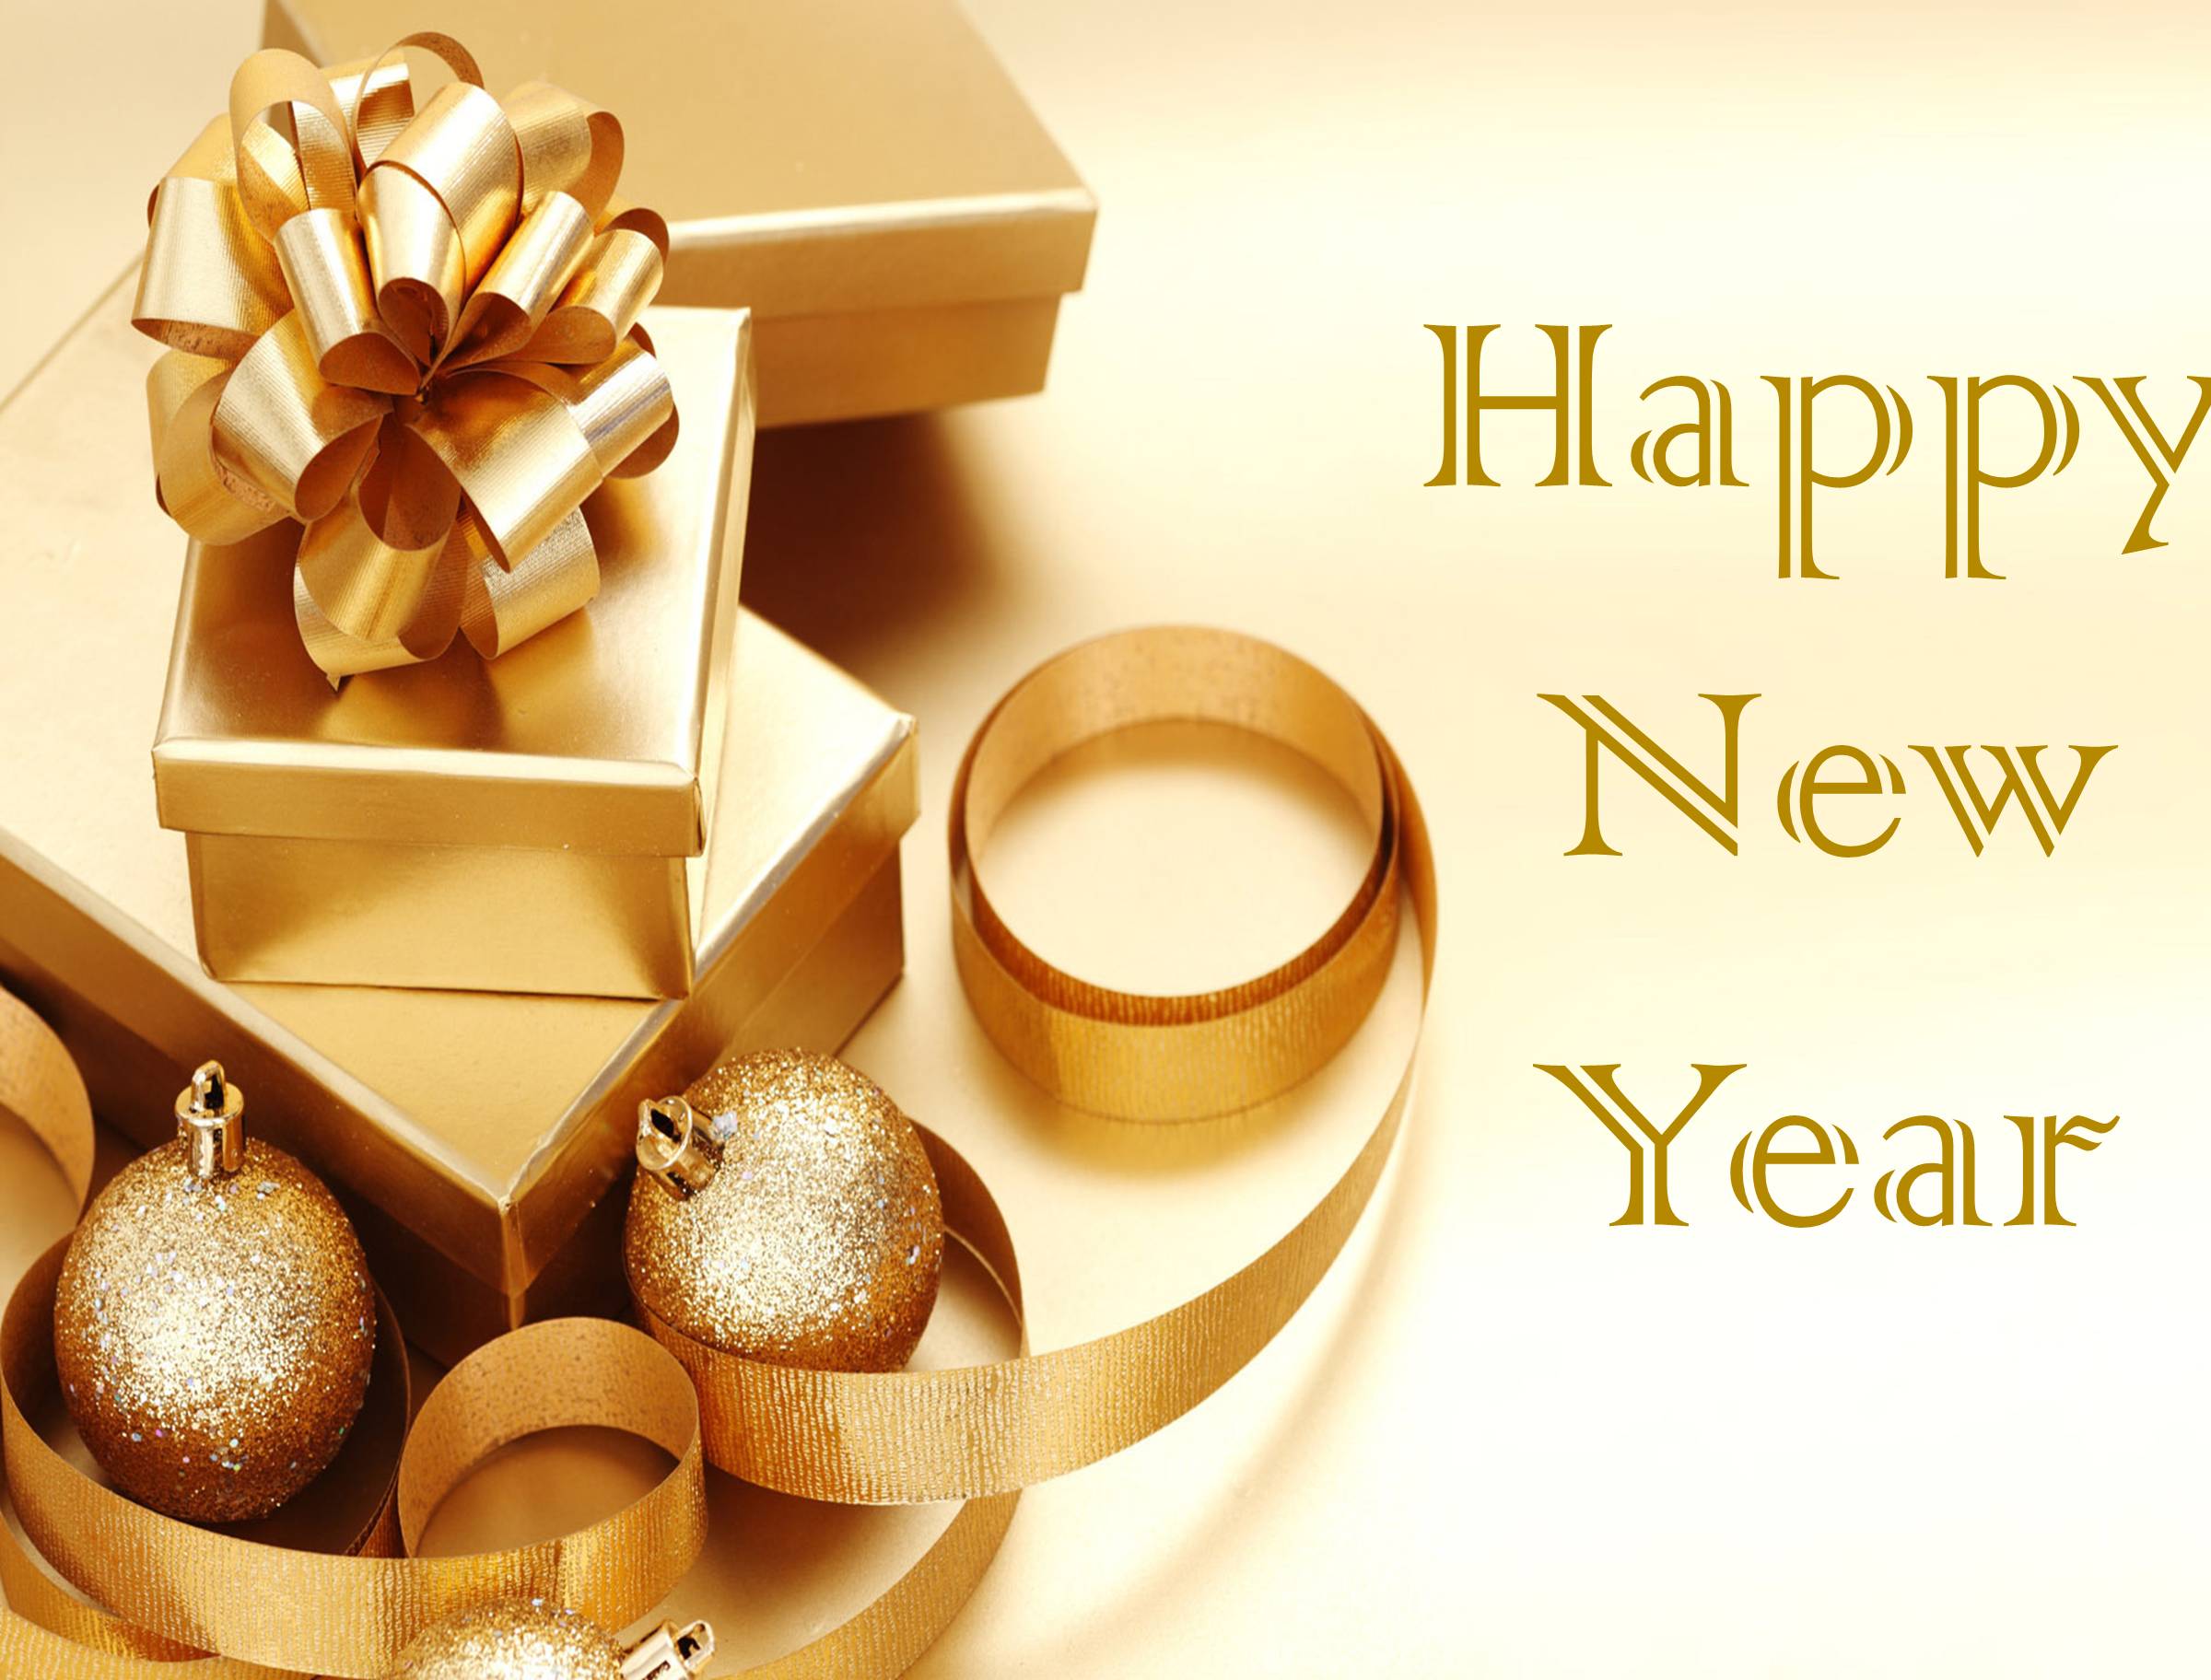 Happy New Year Images Pictures Wallpapers Photos Pics - New Year Wishes  Images Hd - 2400x1824 Wallpaper 